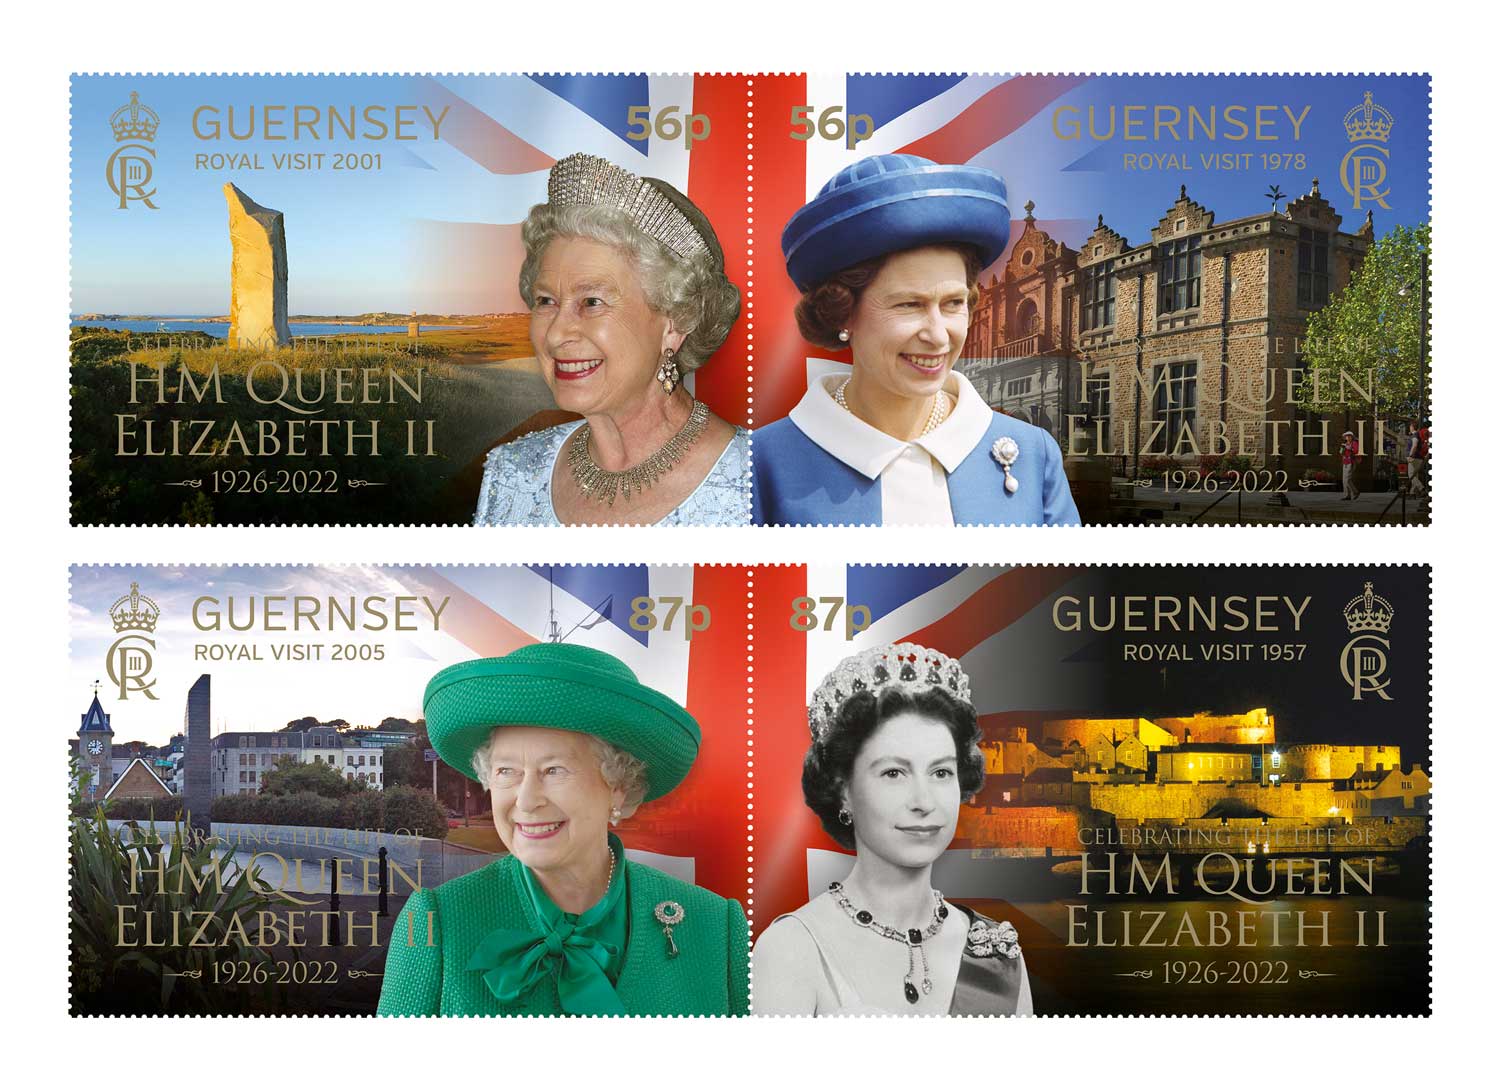 Guernsey Post issues stamps in celebration of the Life of Her Majesty Queen Elizabeth II